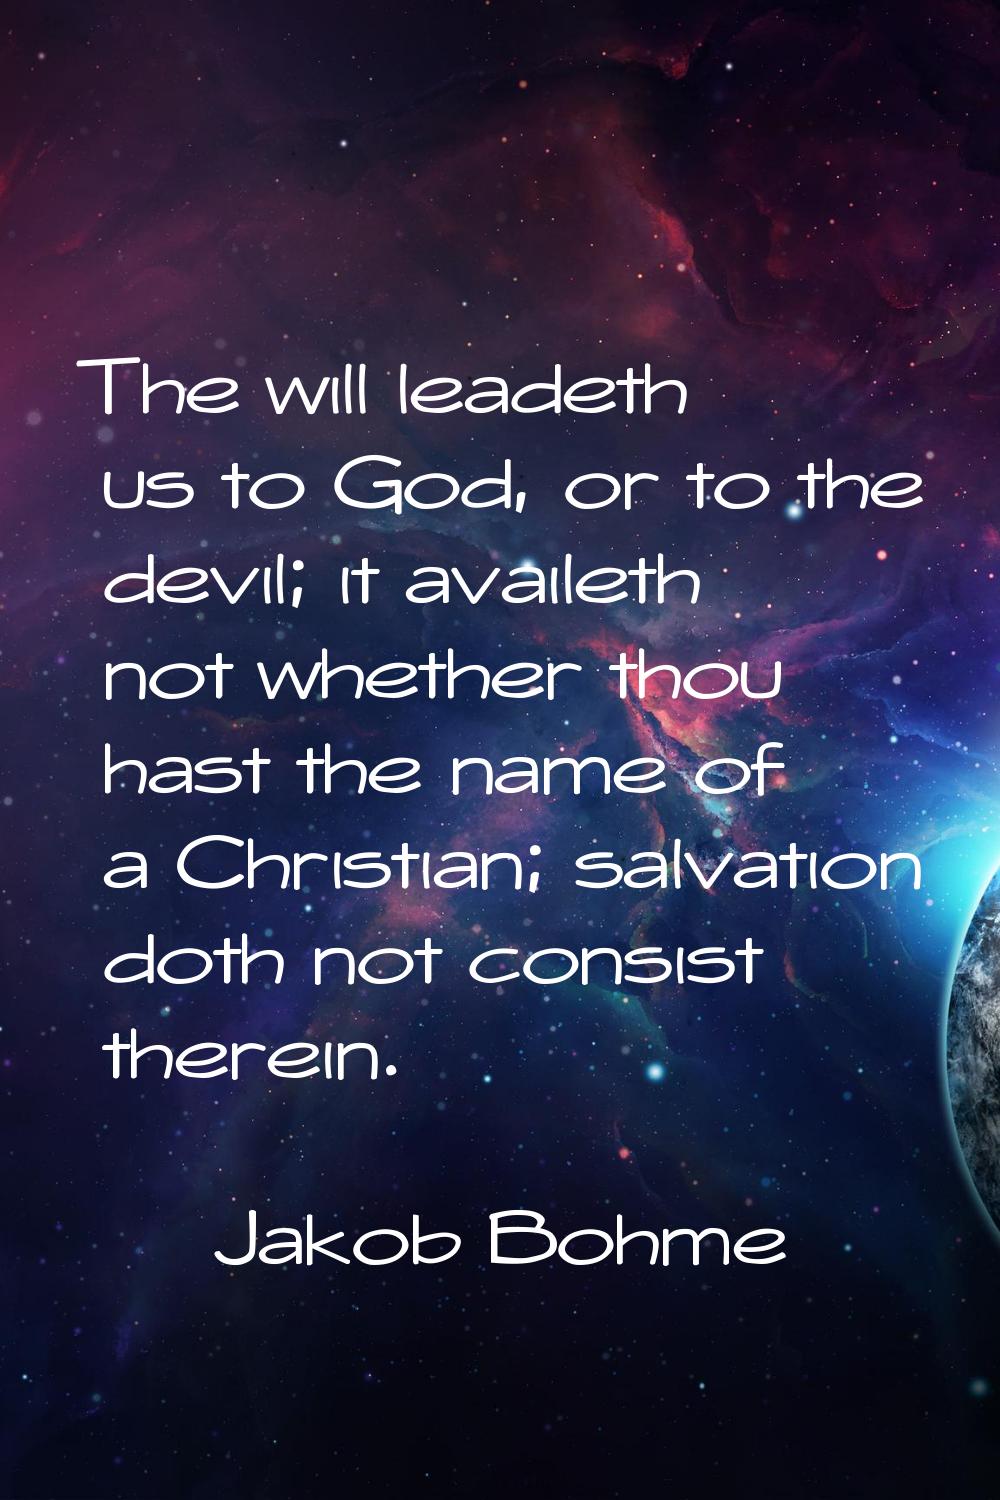 The will leadeth us to God, or to the devil; it availeth not whether thou hast the name of a Christ